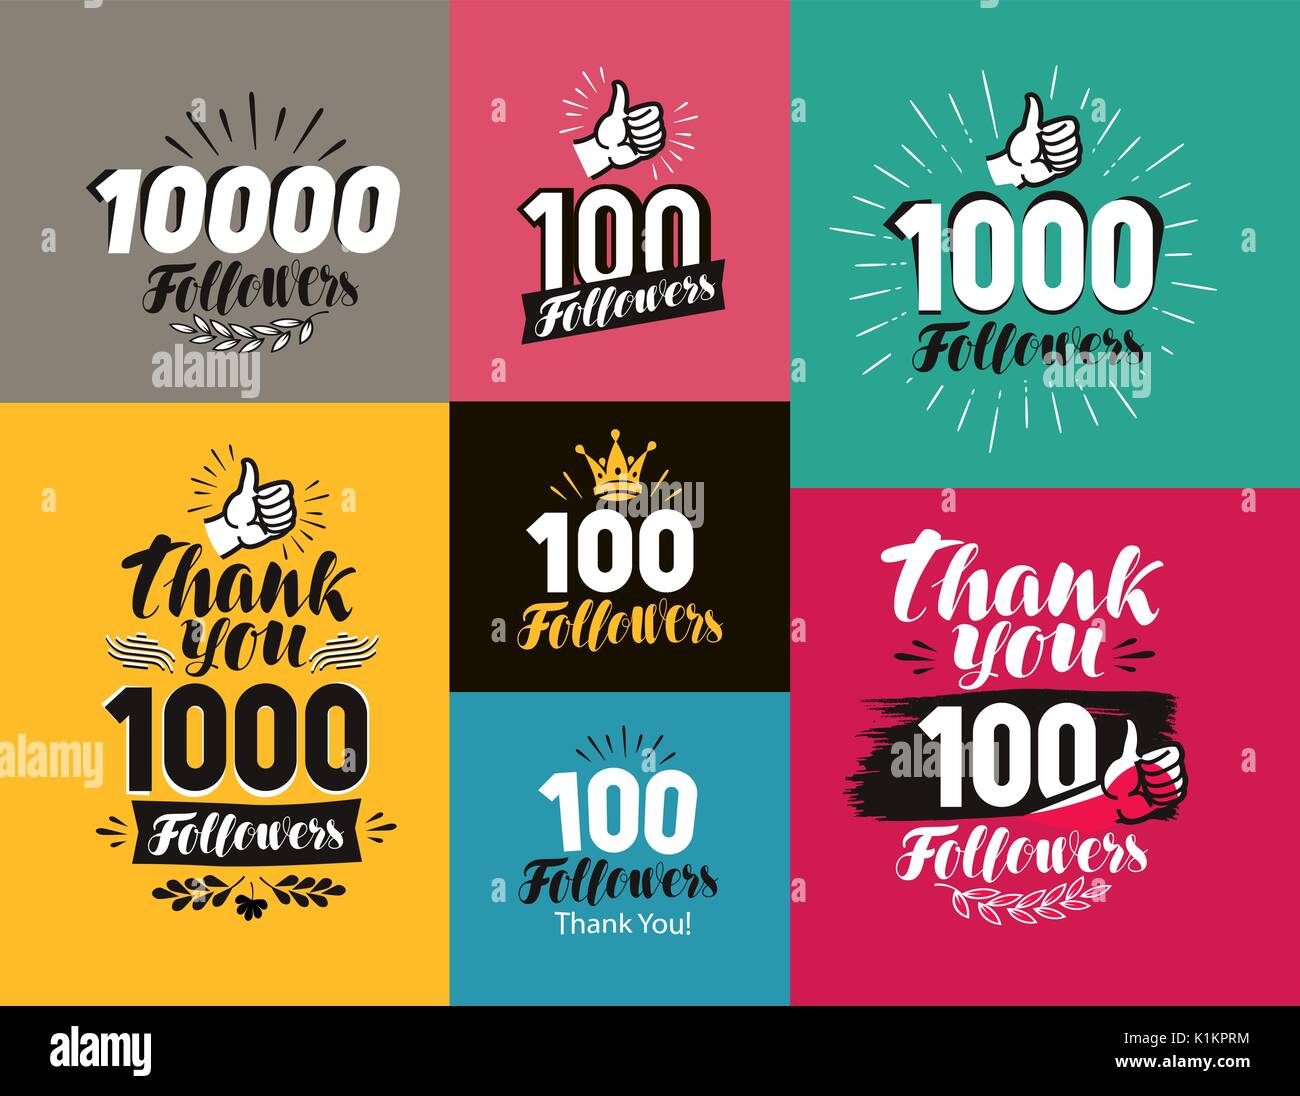 Thank you, followers banner. Network, subscribe label or icon. Handwritten lettering vector Stock Vector